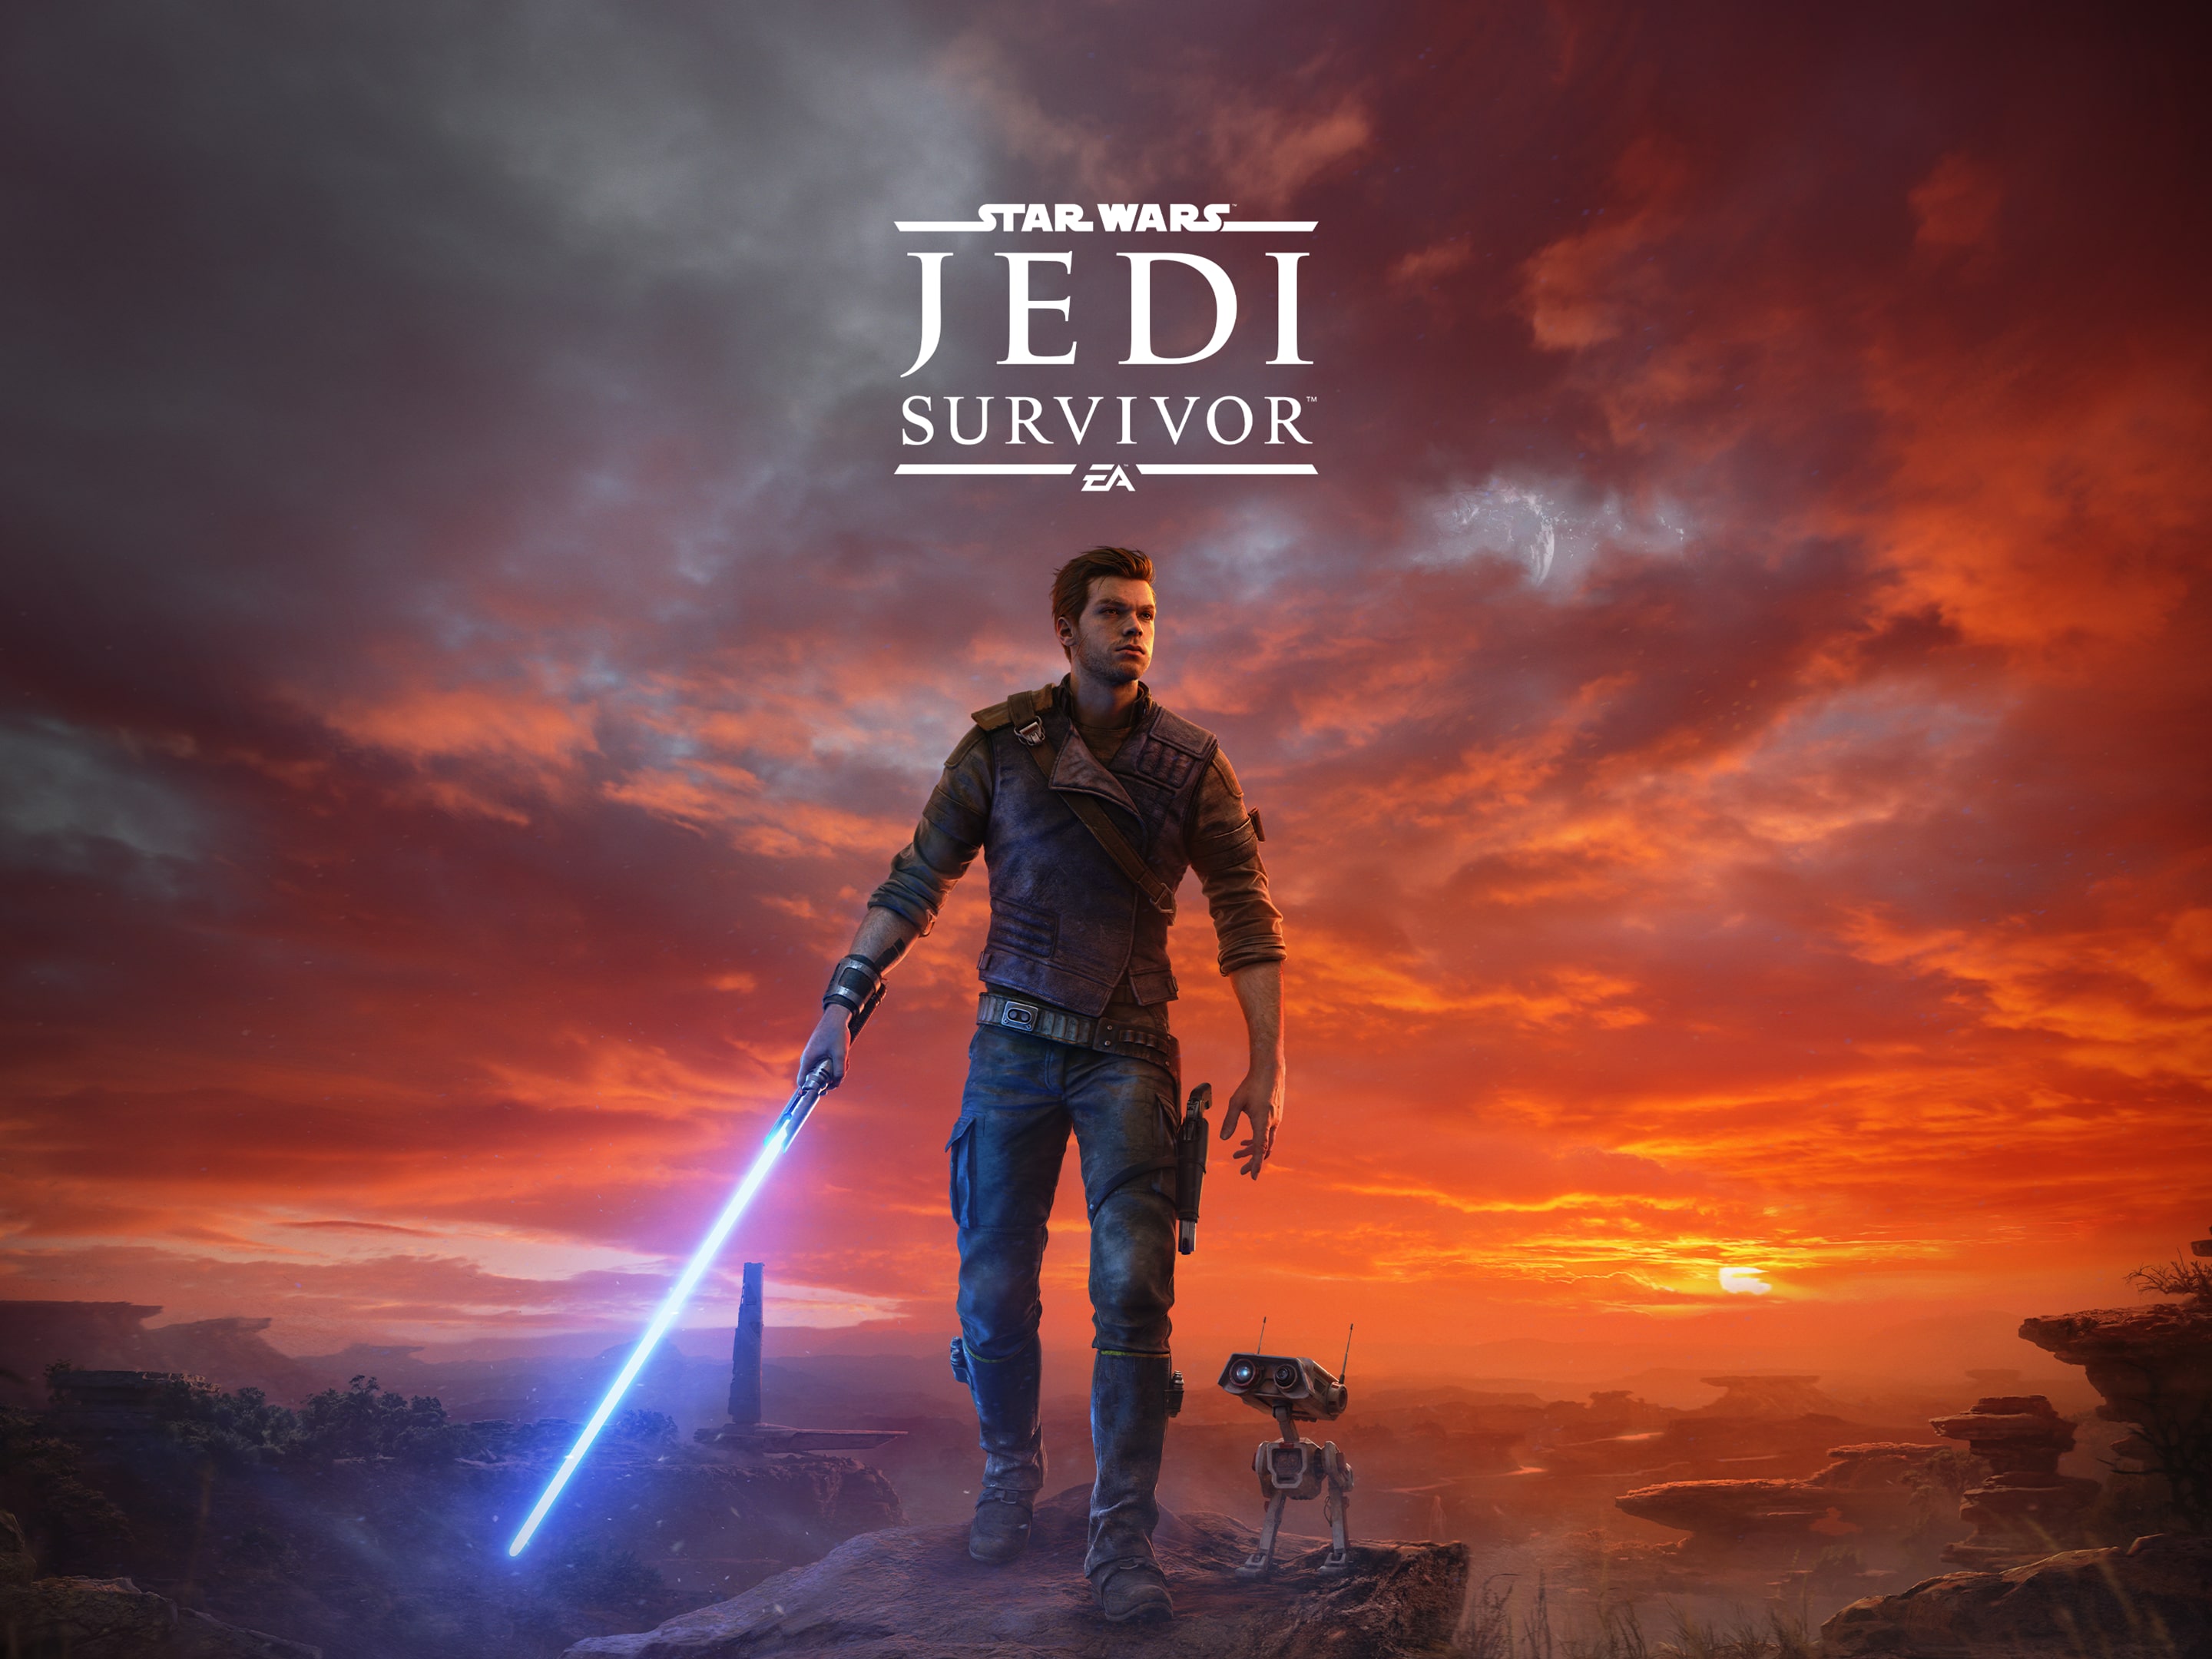 PlayStation users can download Star Wars Jedi: Fallen Order free